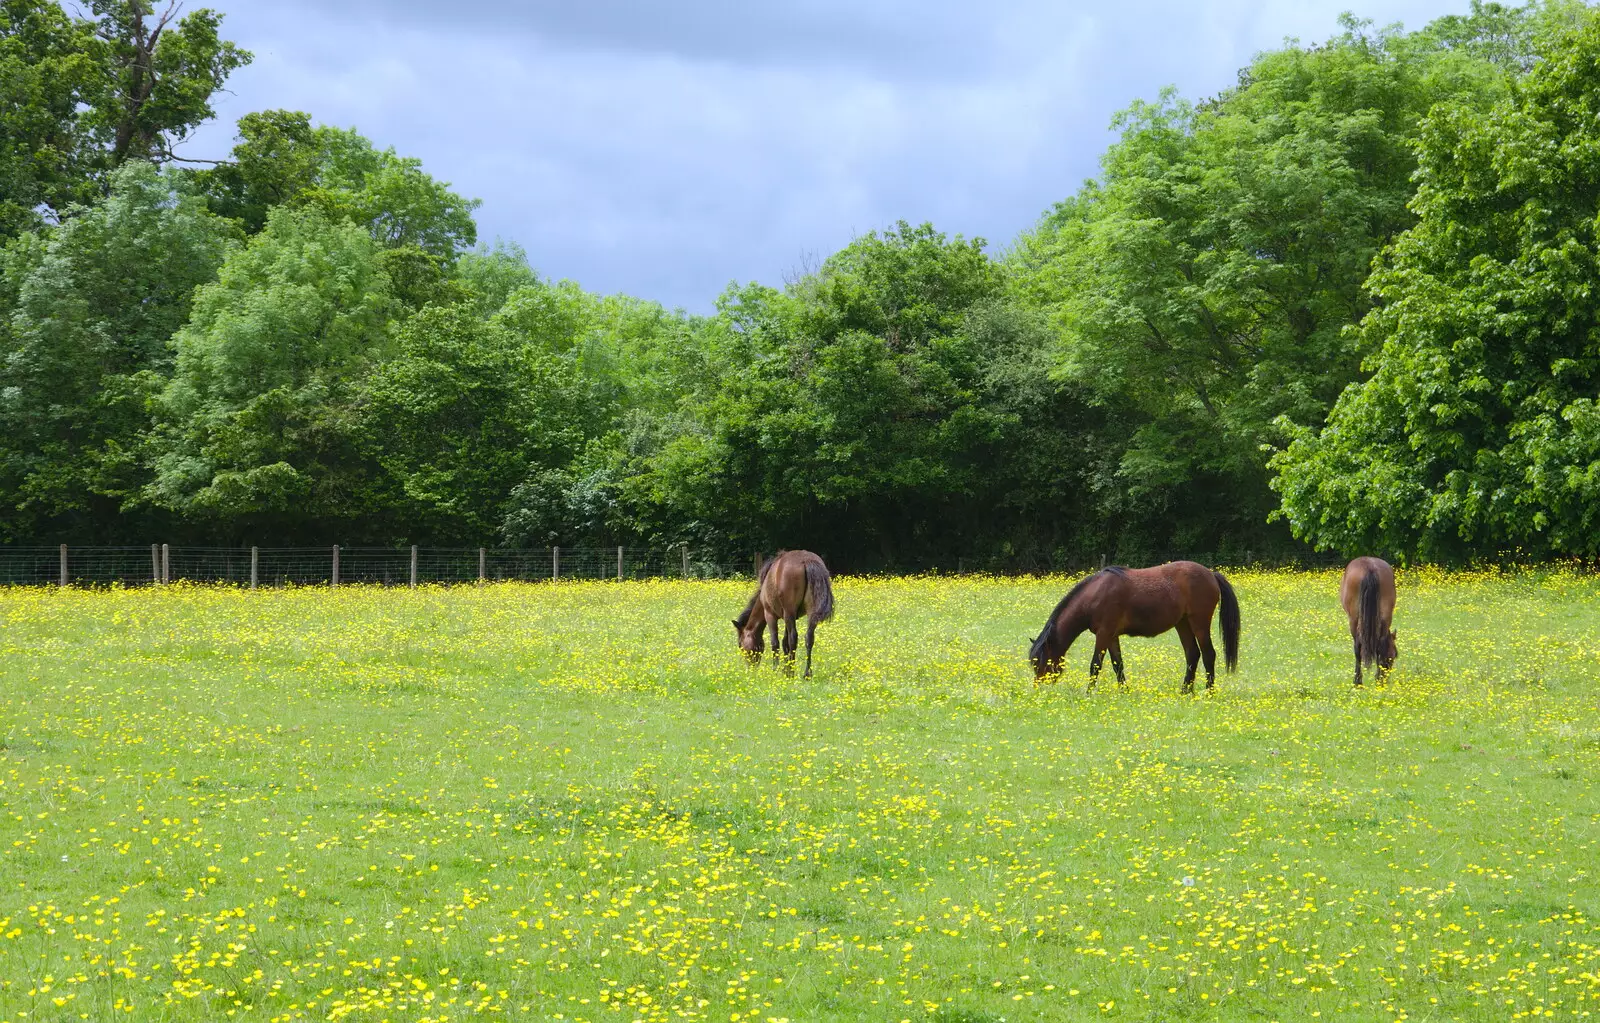 More horses in a field of buttercups, from Chagford Lido and a Trip to Parke, Bovey Tracey, Devon - 25th May 2019